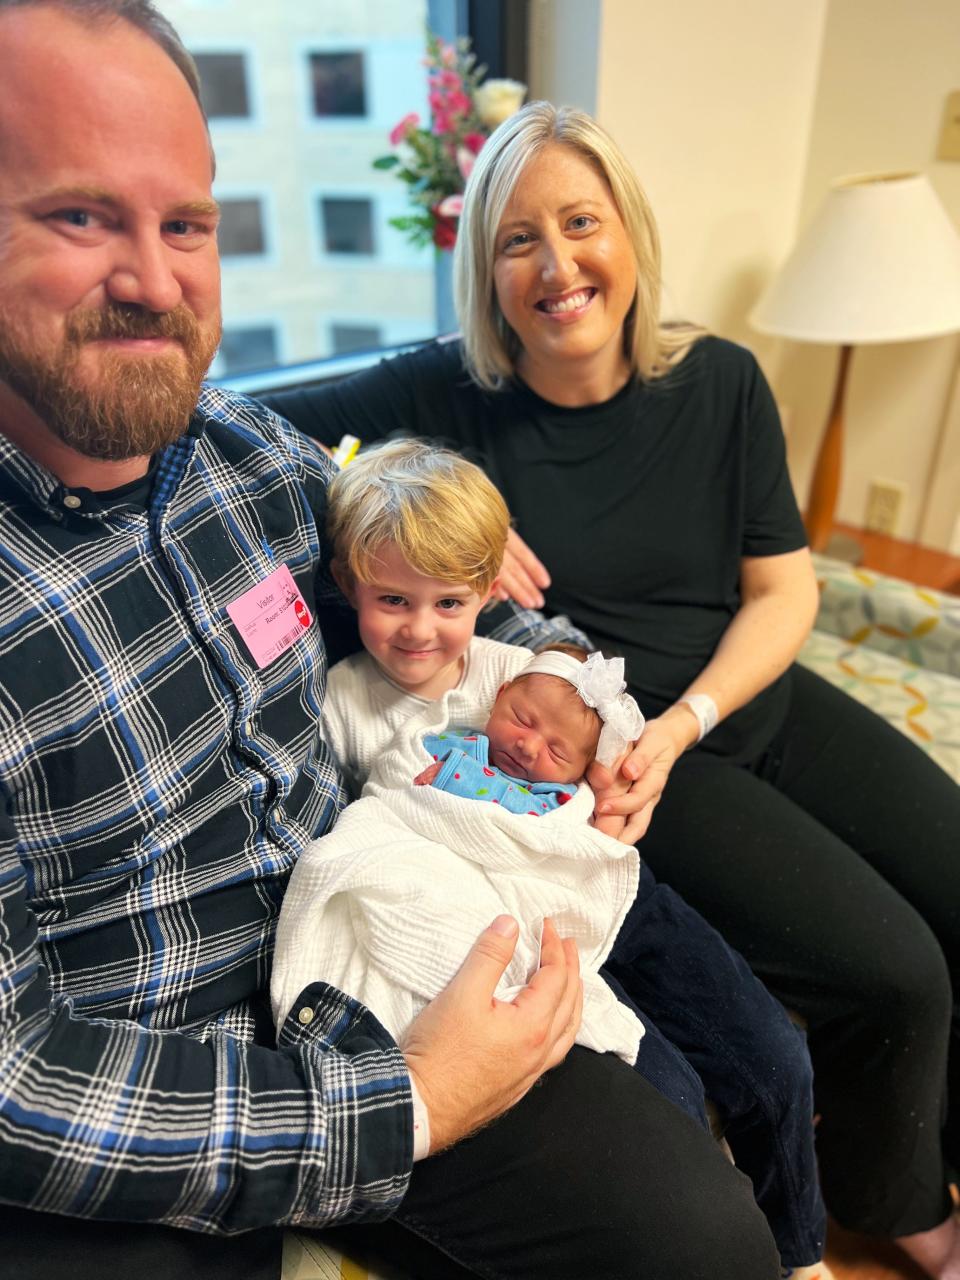 Emilia Claire Kalanimakanui Layne was the first baby born at Mercy Hospital Springfield in 2024. She arrived at 12:18 p.m. on Jan. 1, 2024, and was welcomed by parents Chelsei and Josh Layne and big brother Callum.